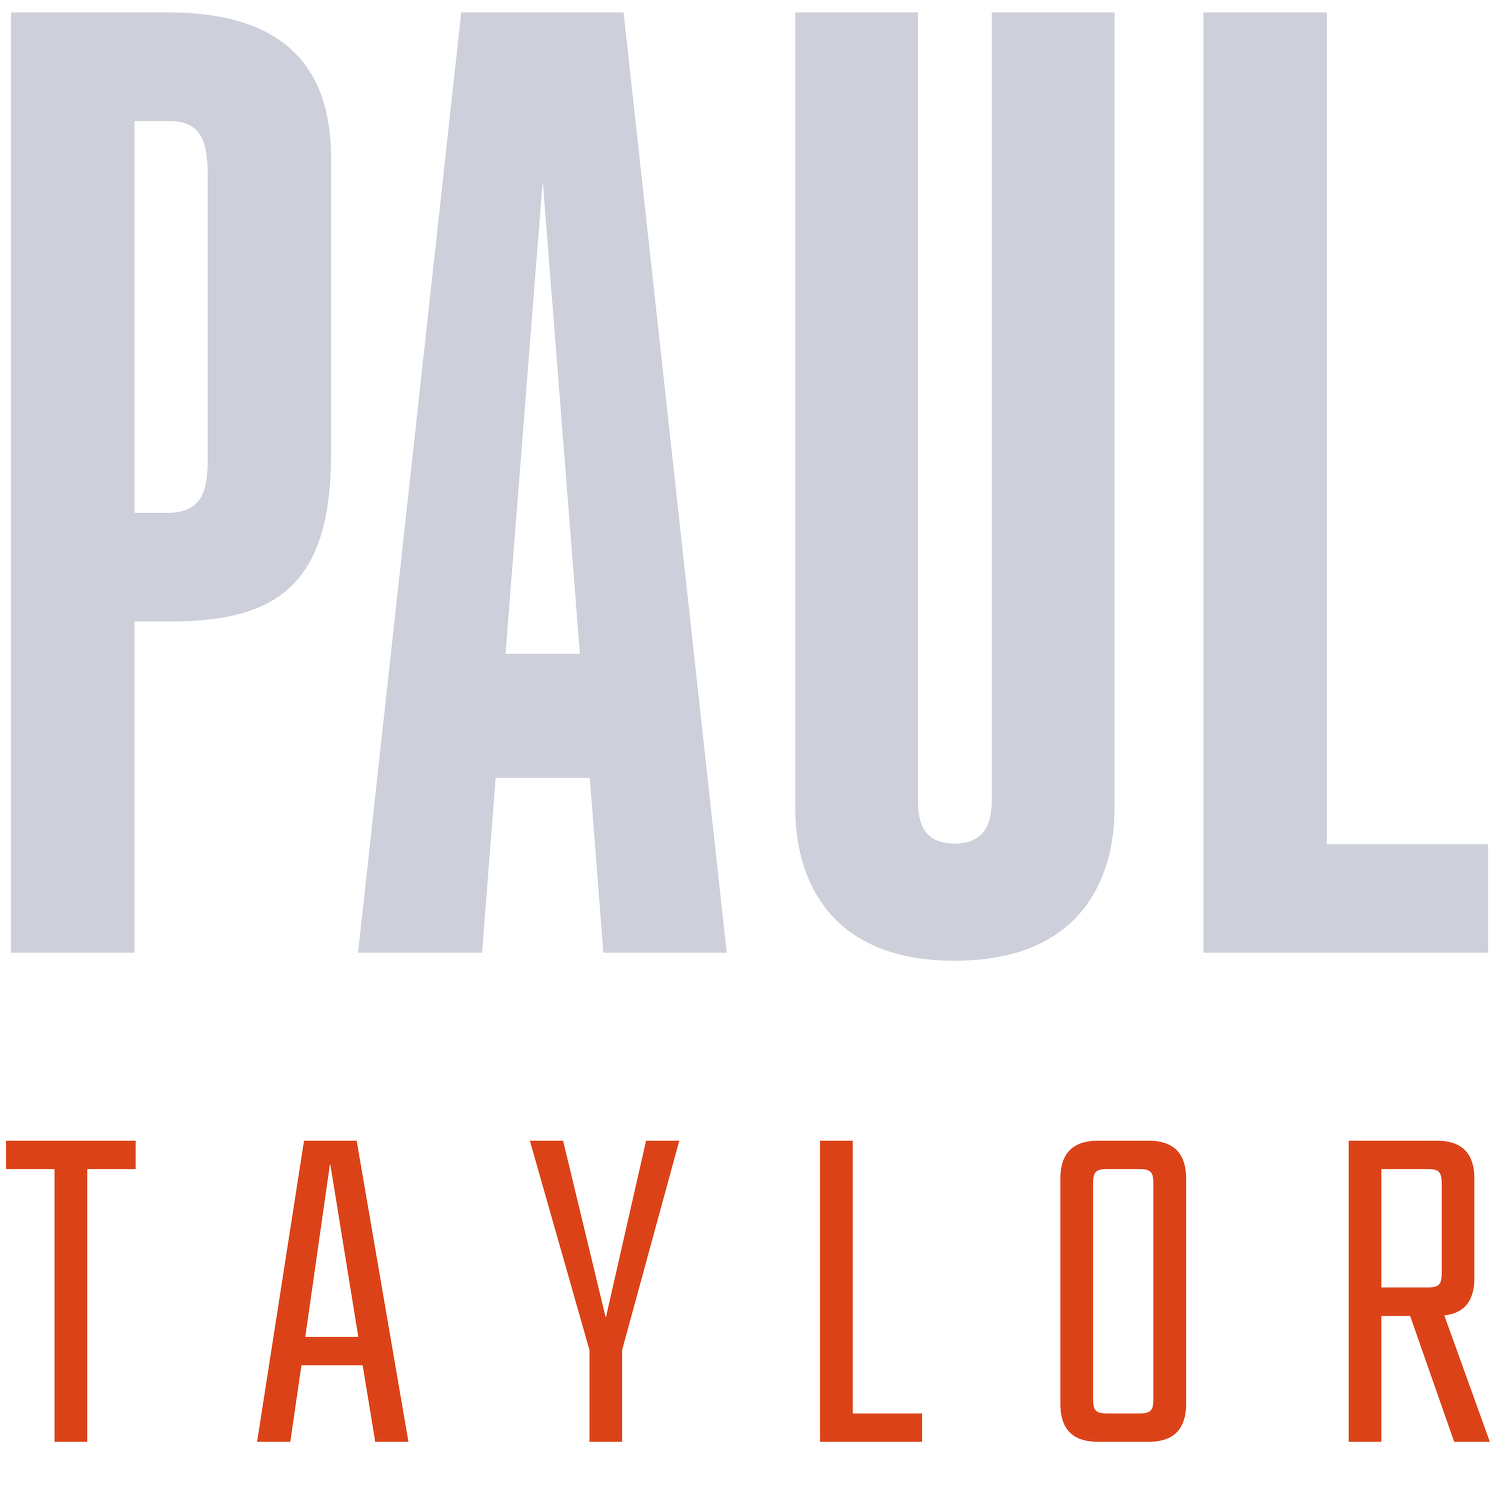 Paul Taylor - Resilience meets performance